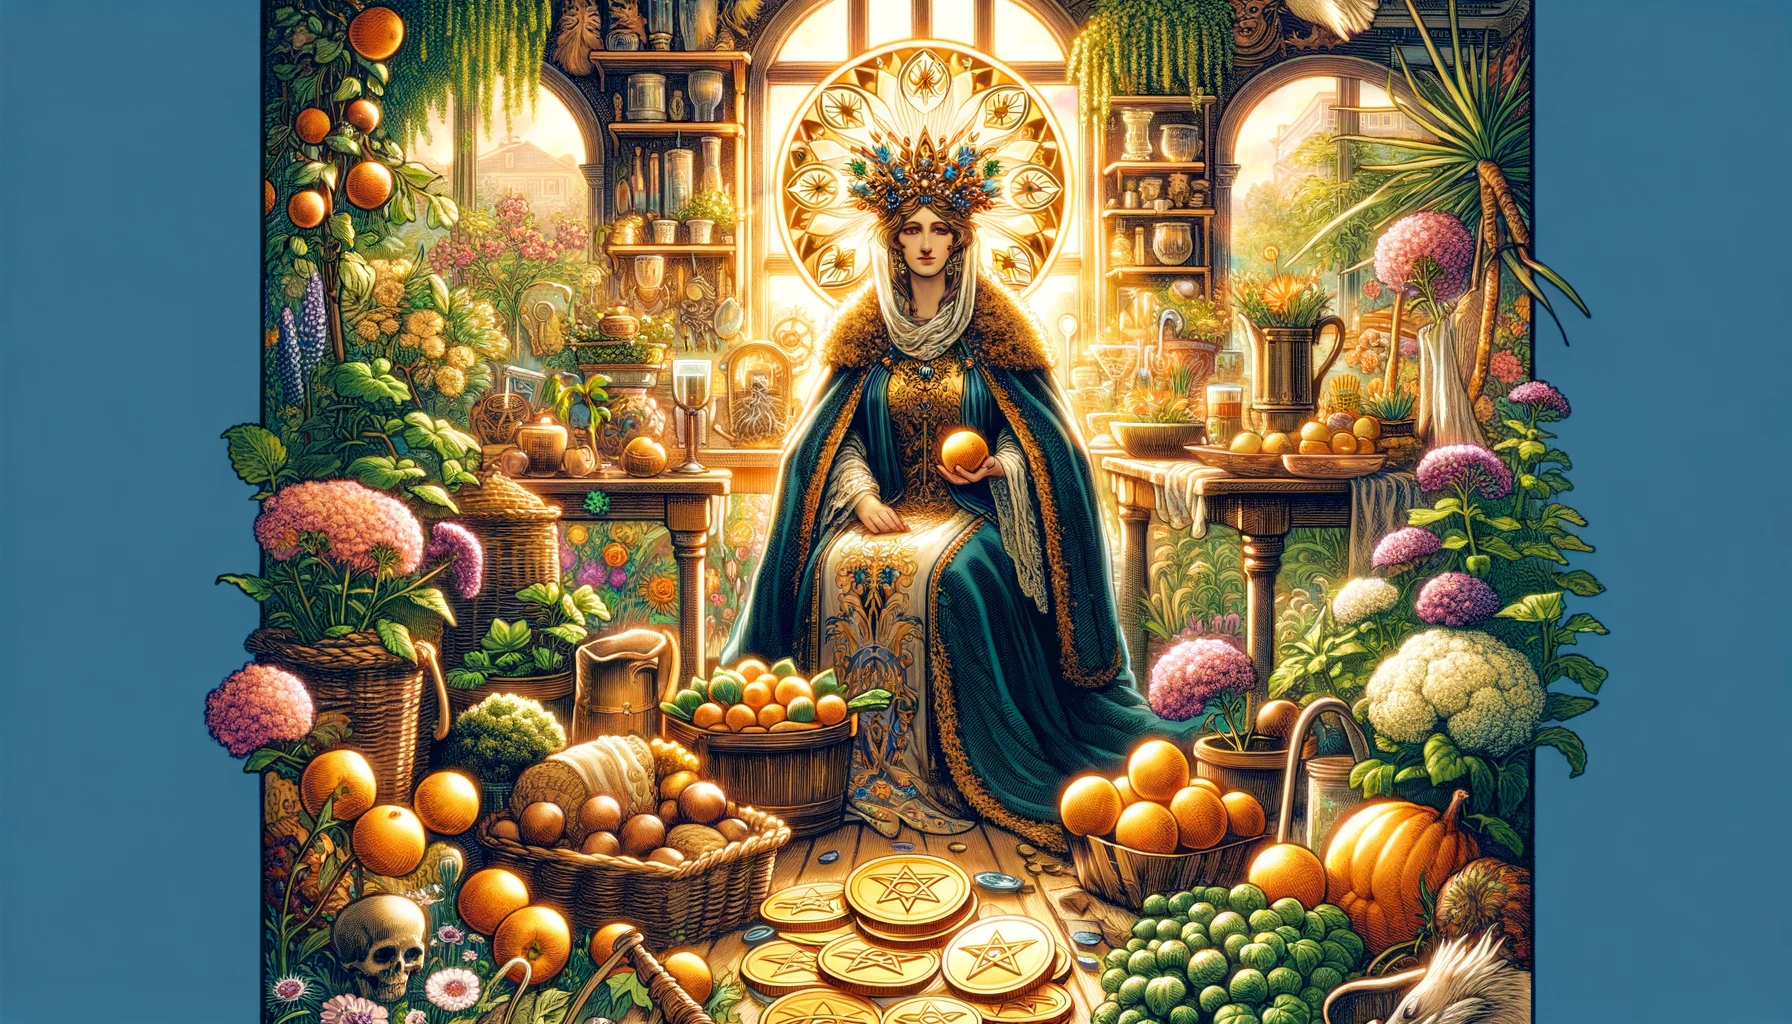 An illustration featuring the Queen of Pentacles seated in a lush garden surrounded by blooming flowers, vibrant foliage, and fruitful trees. The Queen exudes a nurturing presence, tending to the plants with care and compassion. Her expression radiates warmth and contentment as she oversees the abundance and growth in her surroundings. The scene evokes feelings of stability, prosperity, and maternal care, symbolizing the positive and fruitful aspects of the Queen of Pentacles card.